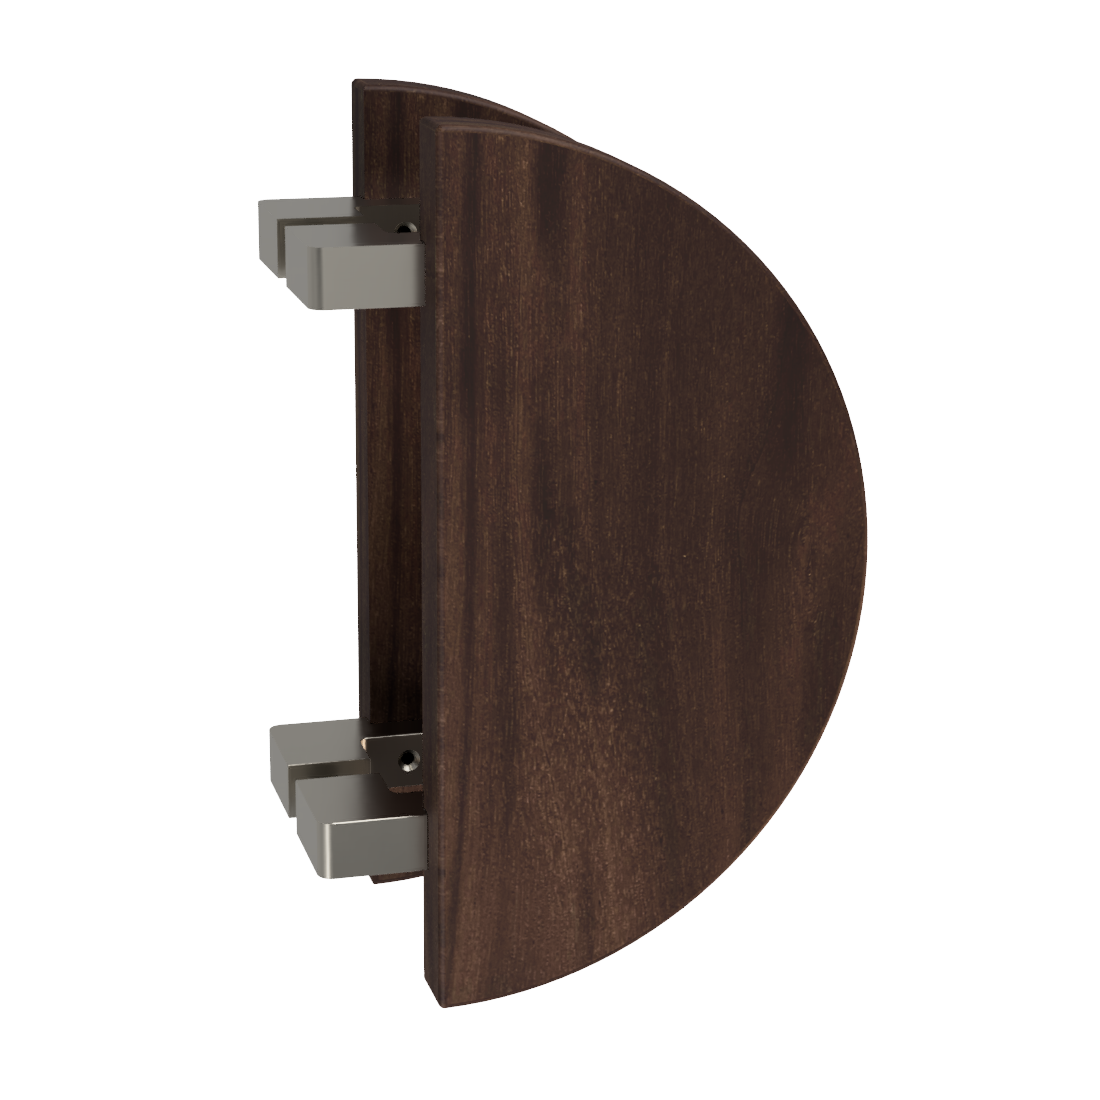 Pair T02 Offset Timber Entrance Pull Handle, American Walnut, Back to Back Pair, Ø300mm, Coated in Raw Timber (ready to stain or paint) in Walnut / Satin Nickel